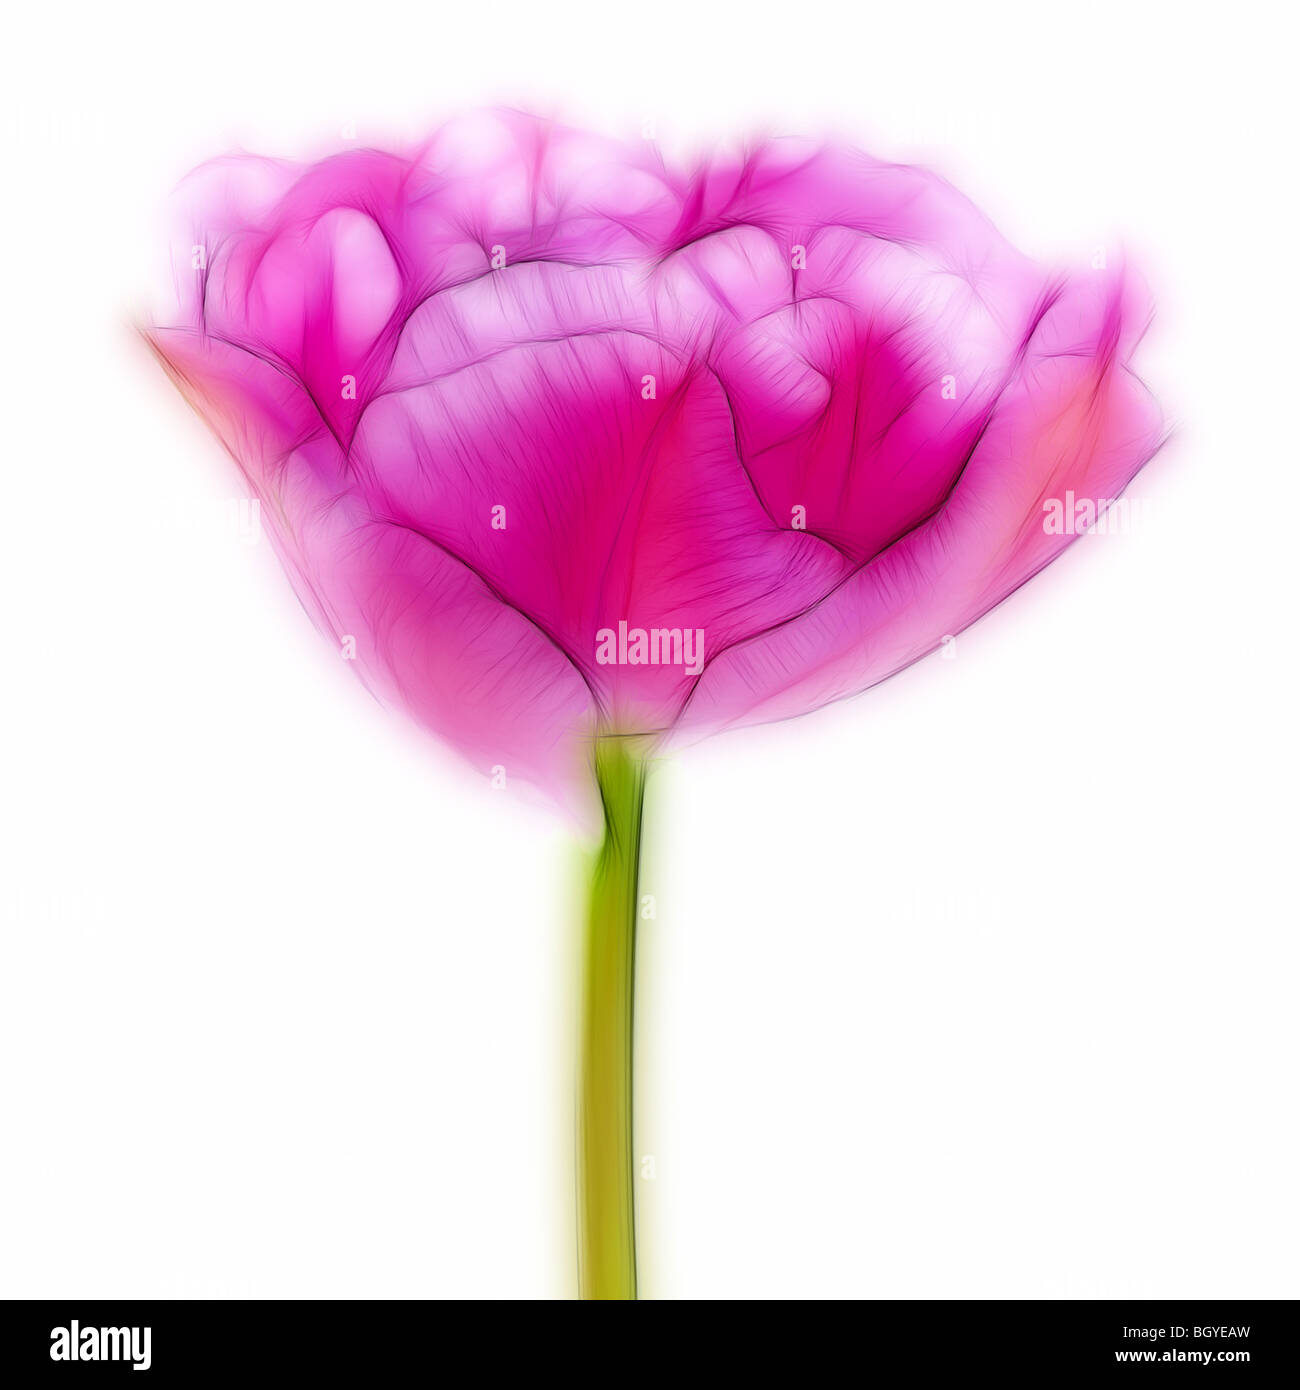 Photo illustration:  A close-up of a single pink tulip in full bloom Stock Photo